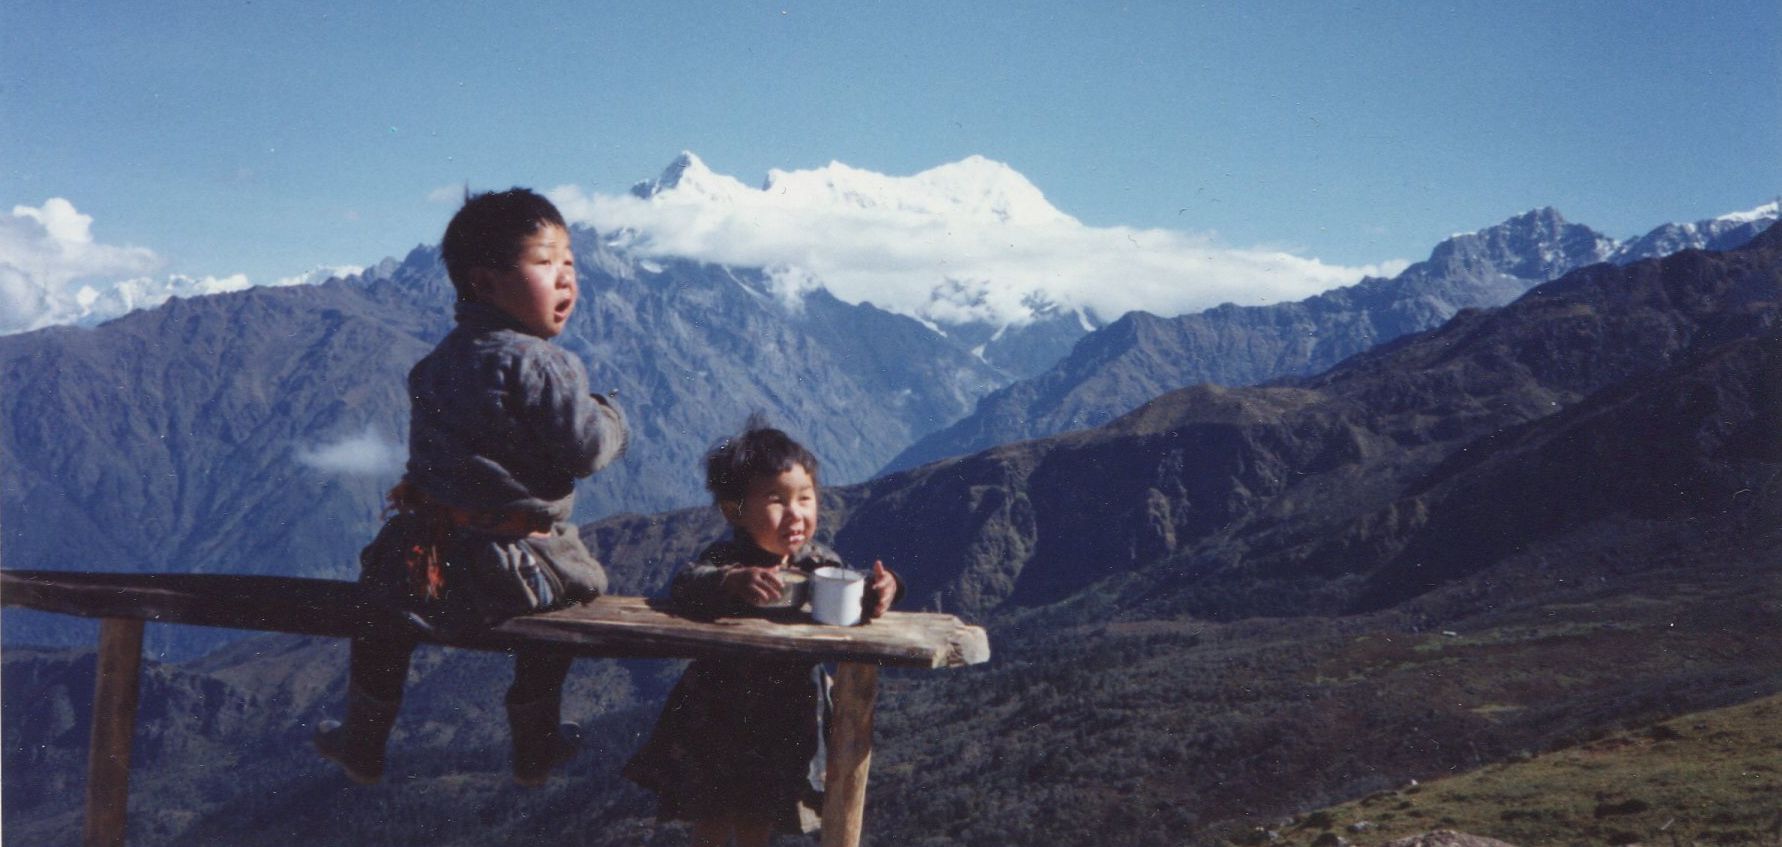 Nepalese children and Mount Langtang Lirung ( 7227m ) on ascent from Syabru to Gosaikund